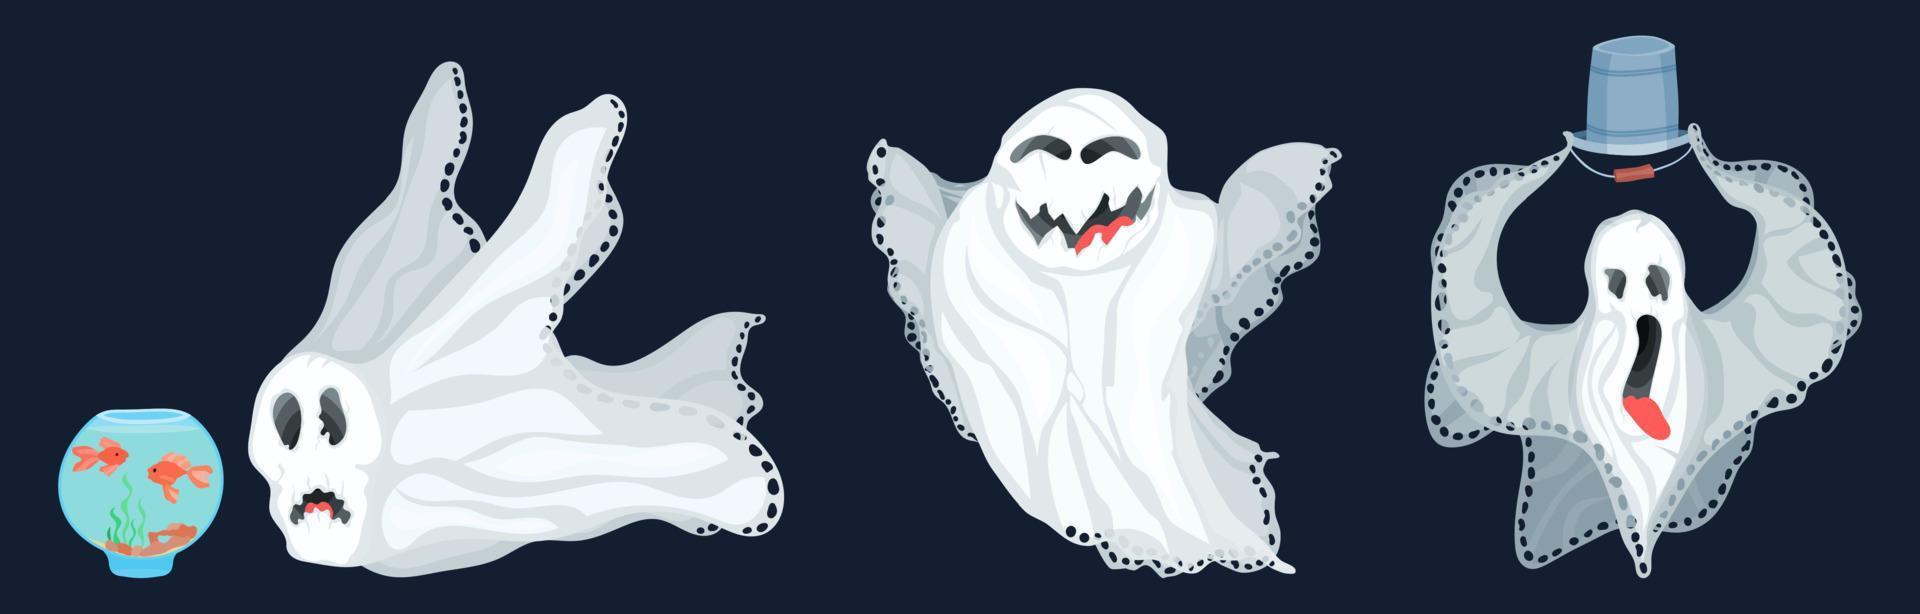 a selection of ghosts in a flat style on a dark vector